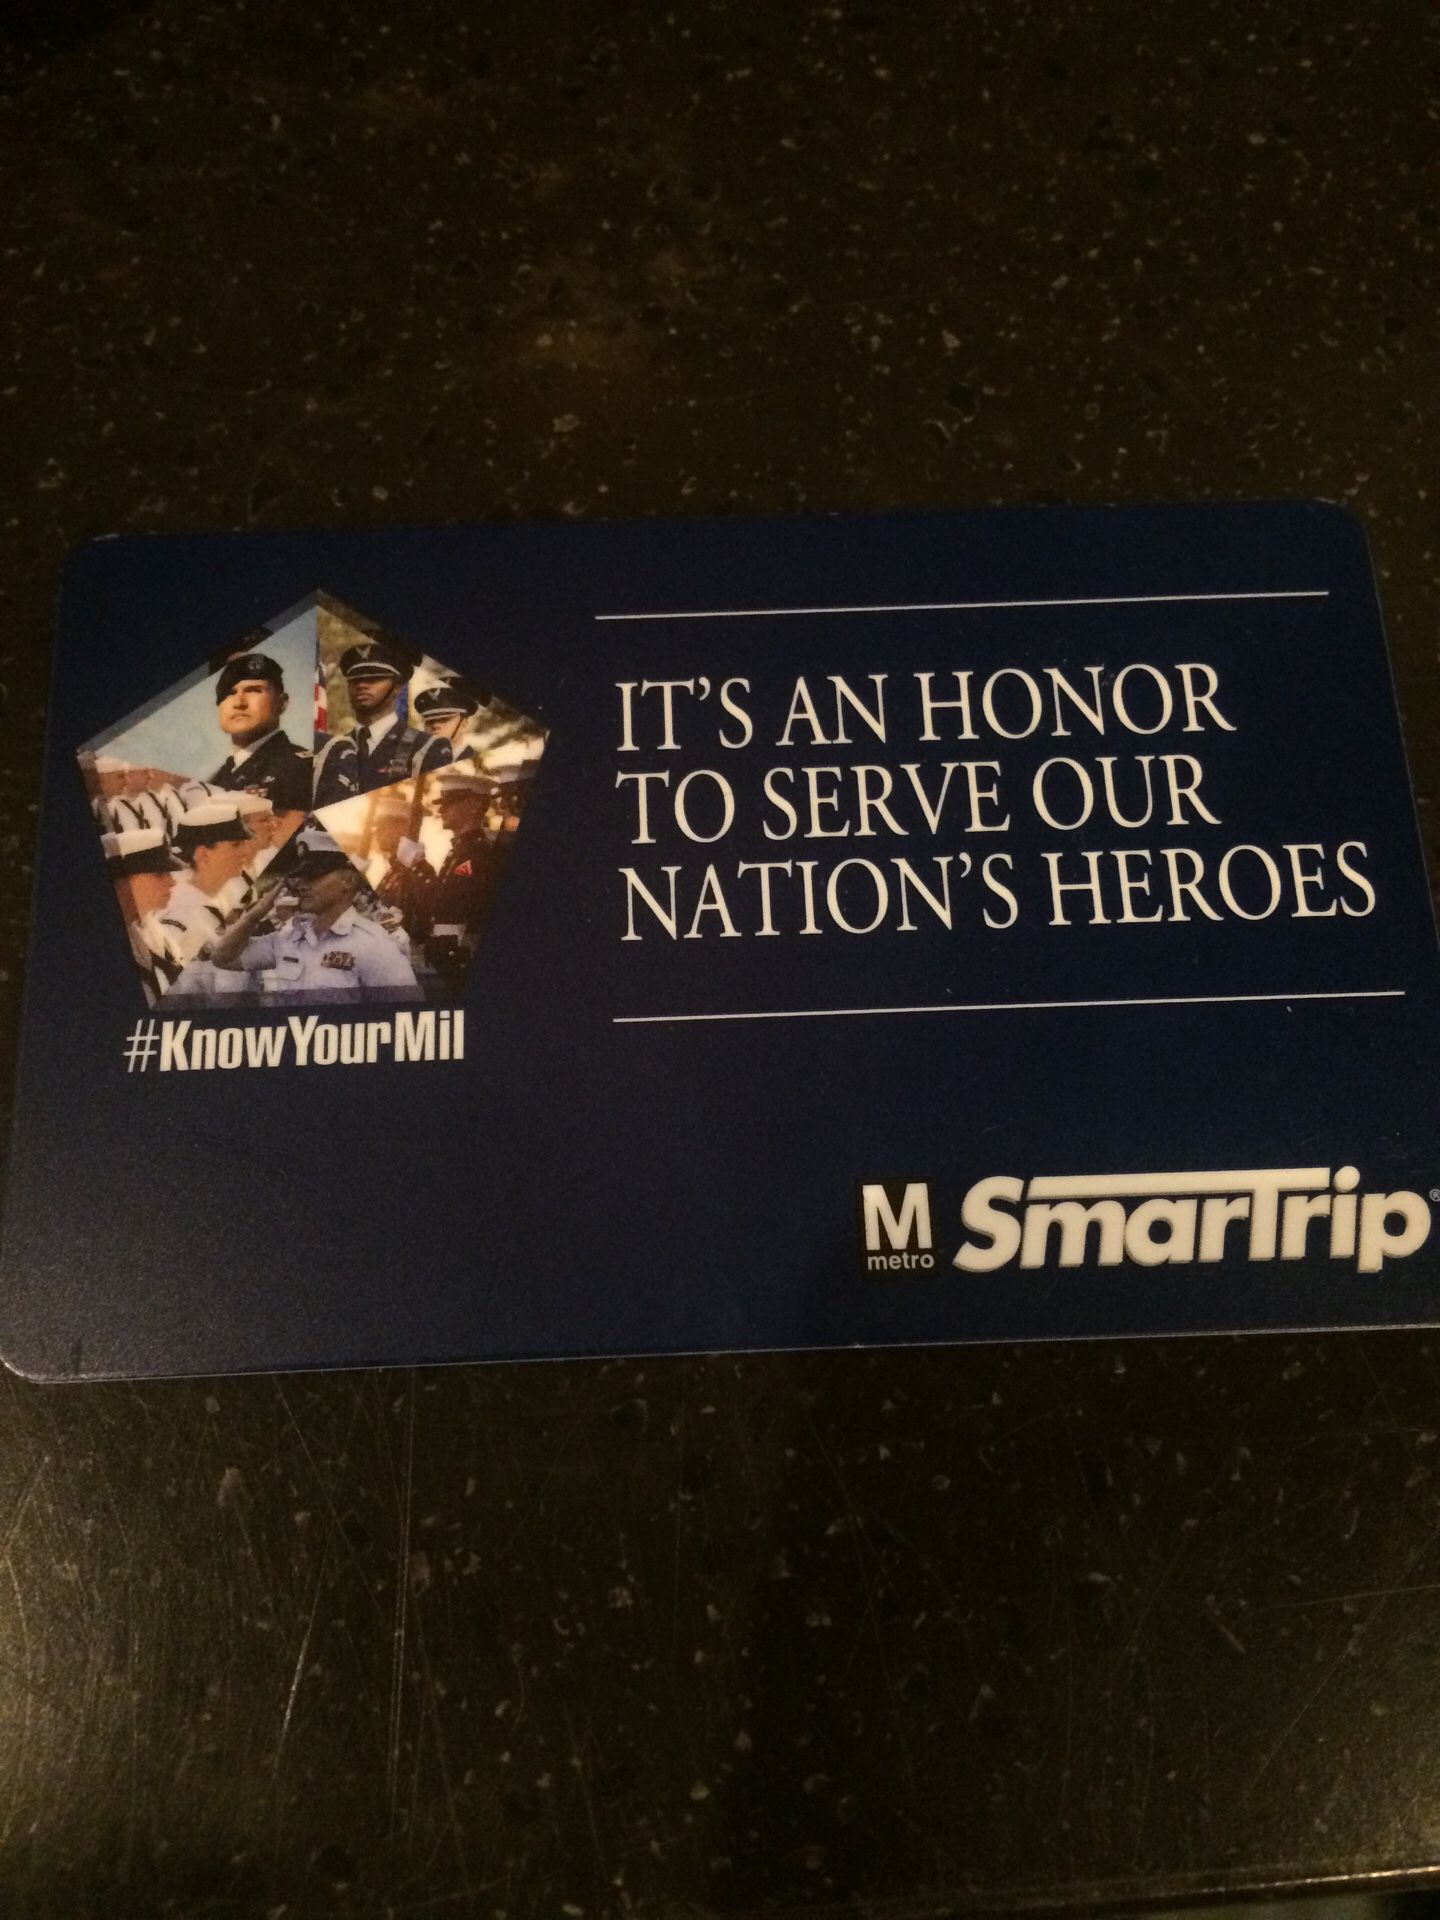 Smart trip card brand new with $12 value